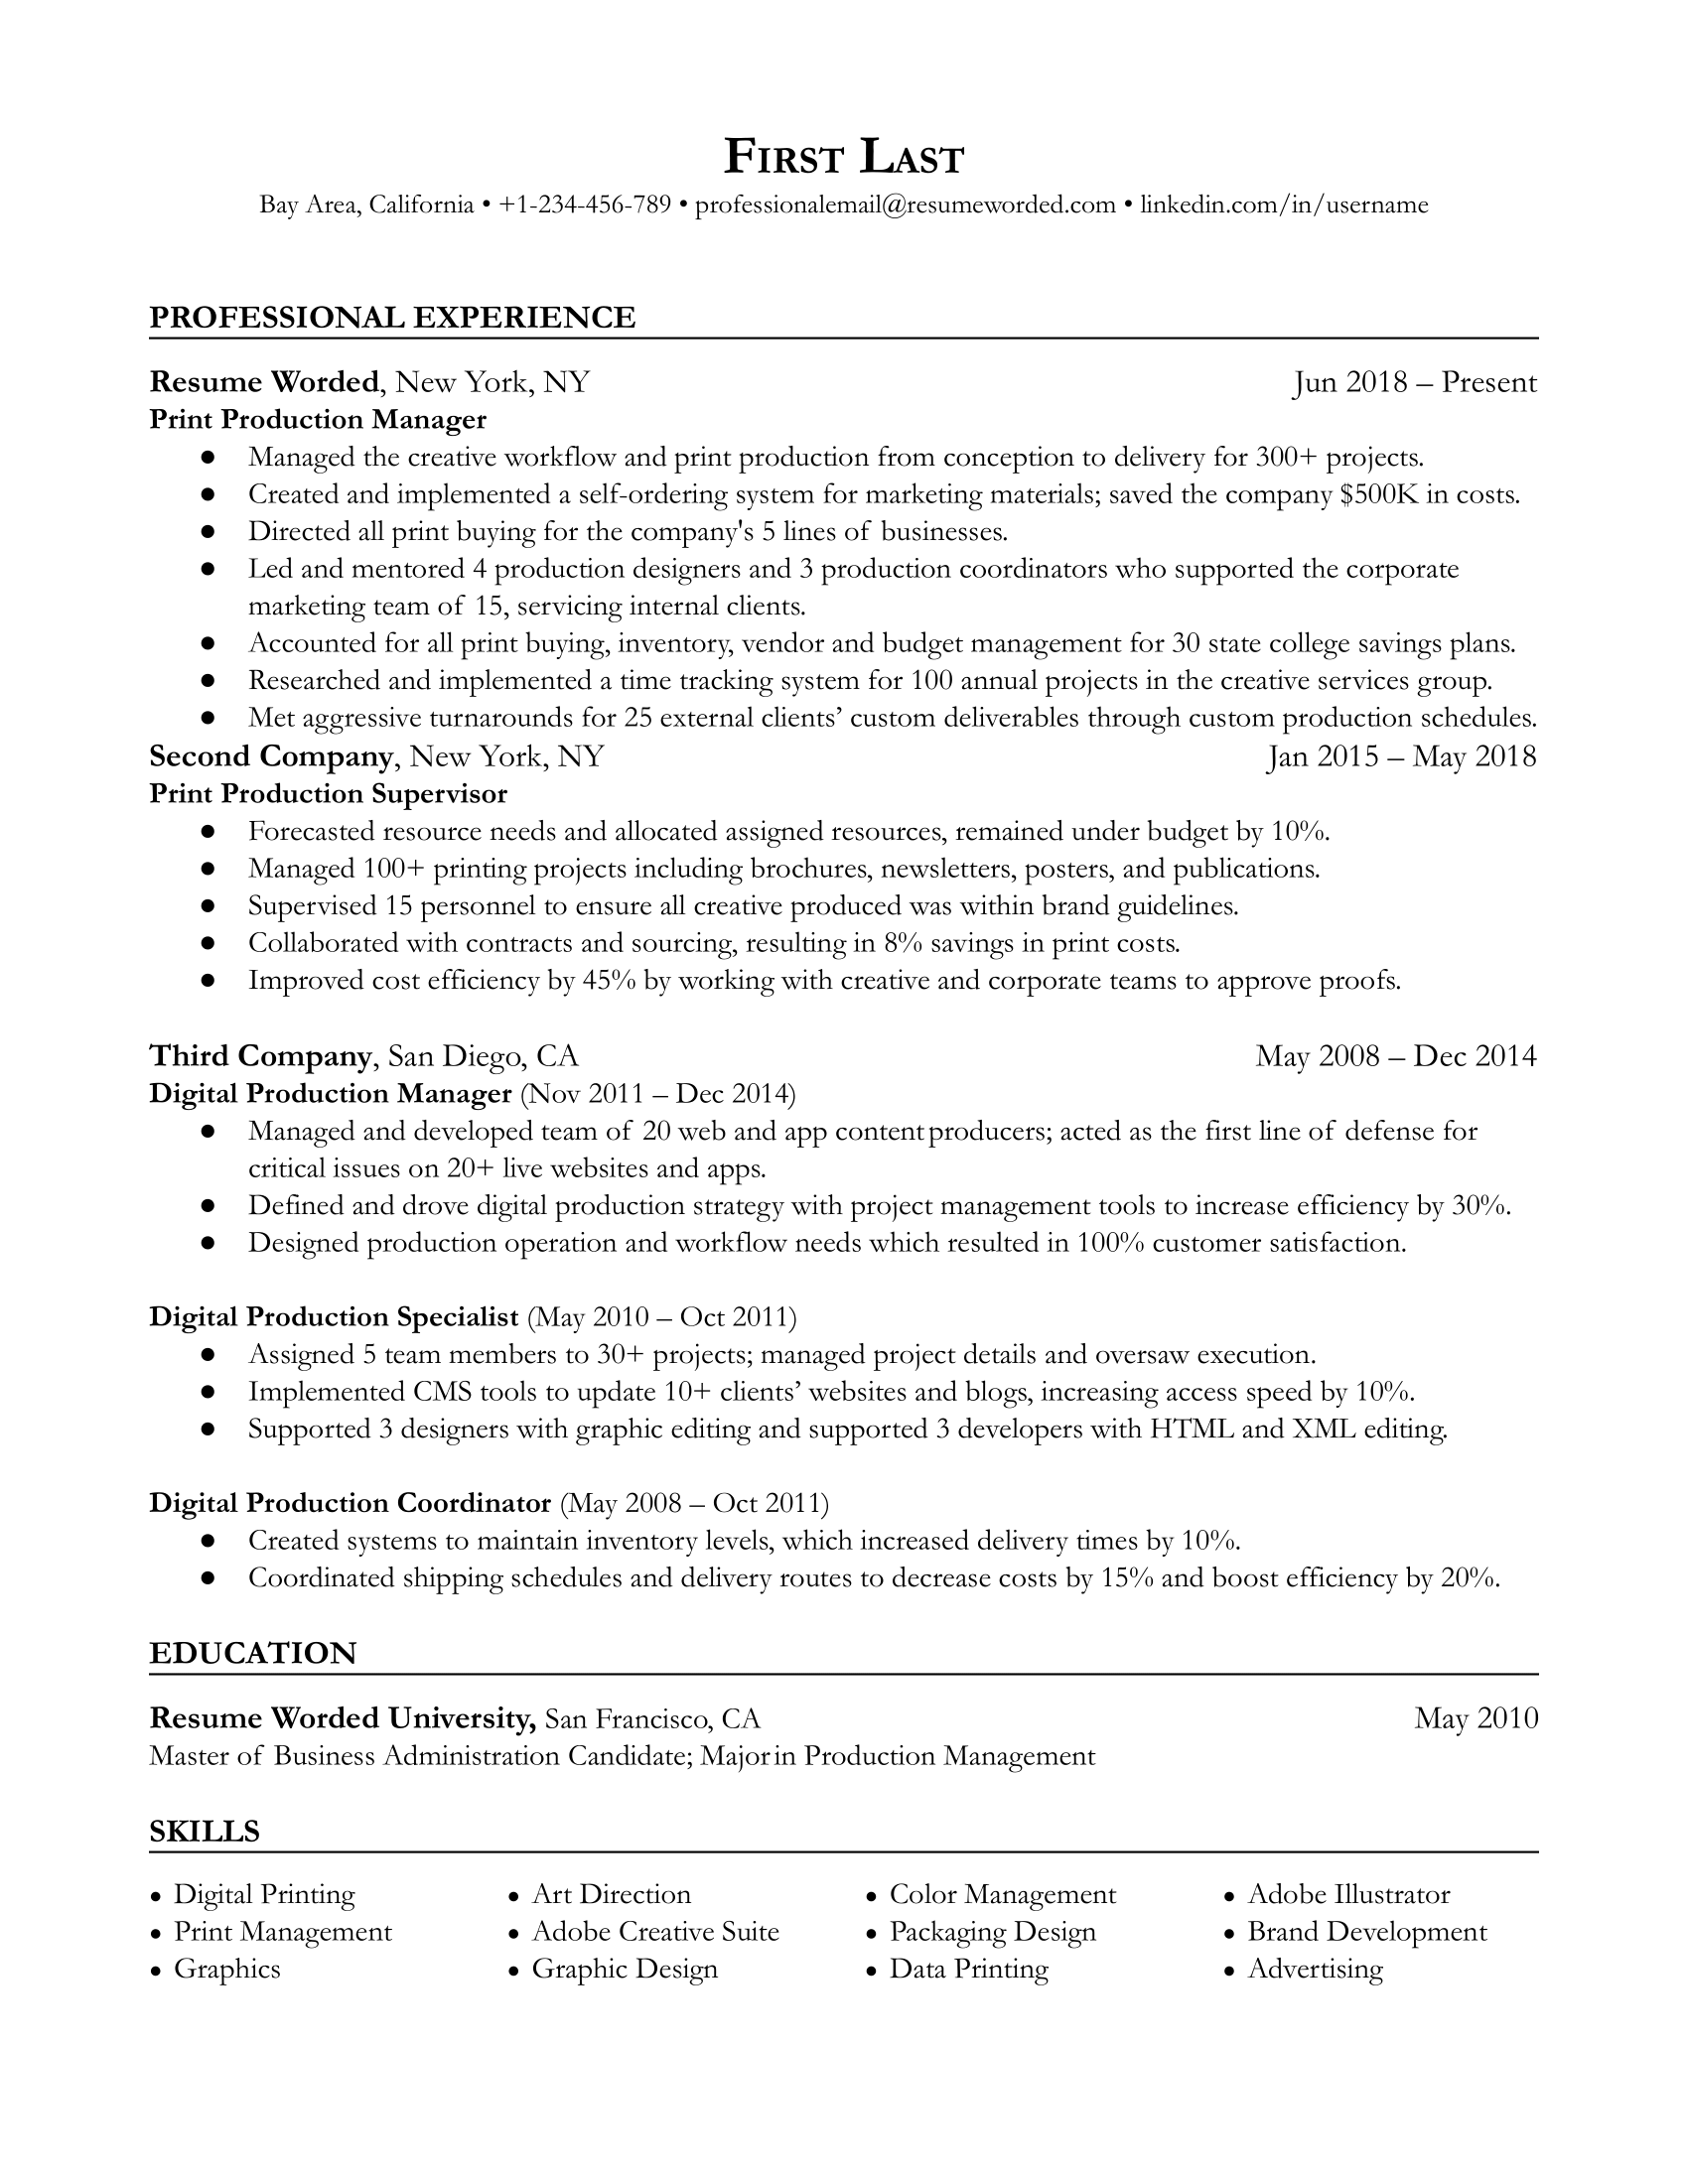 Print Production Manager Resume Sample